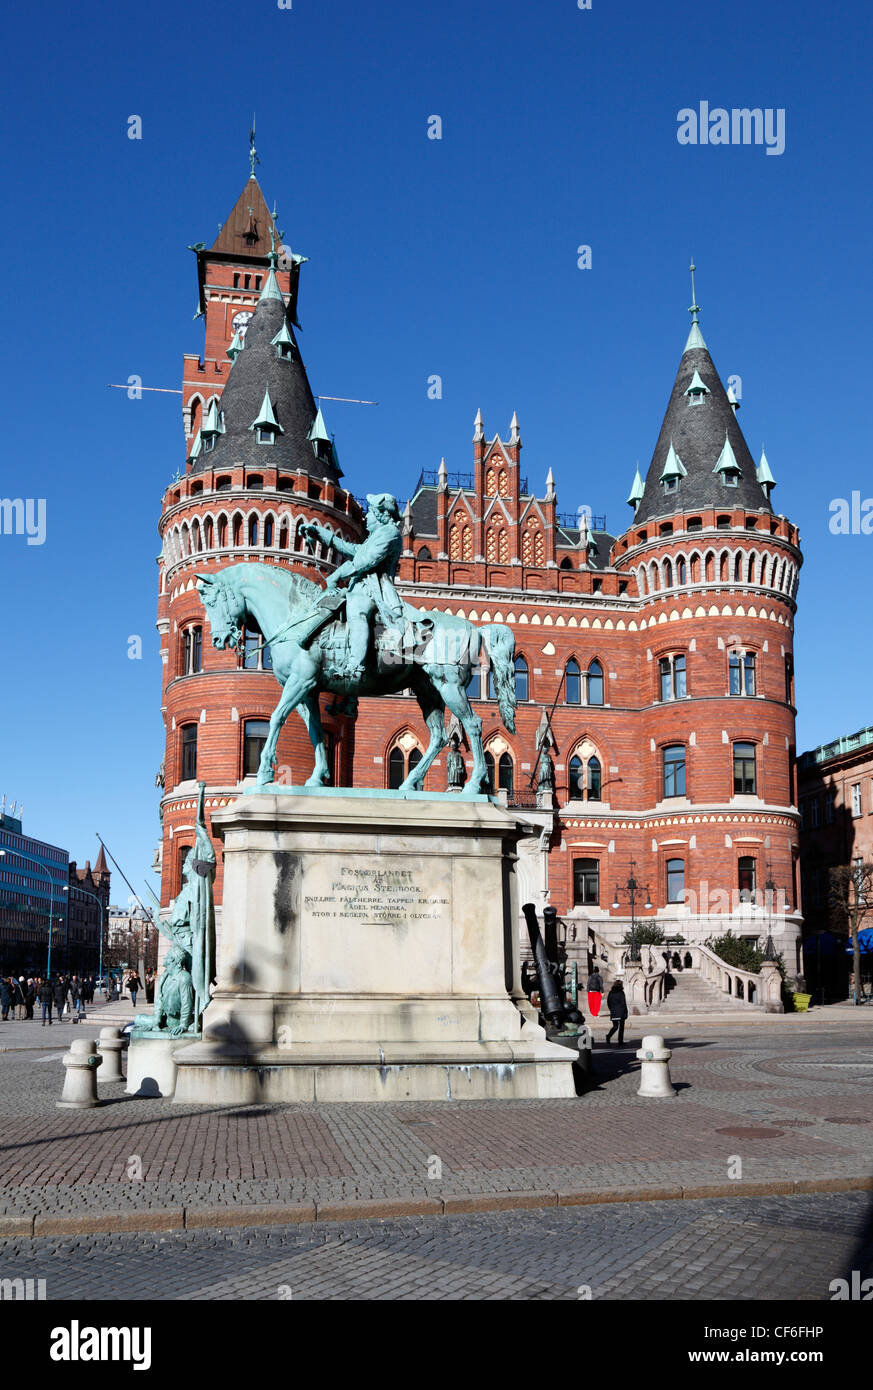 The equestrian statue of Magnus Gustafsson Stenbock at Stortorget in front of the neo-Gothic City Hall in Helsingborg, Sweden Stock Photo